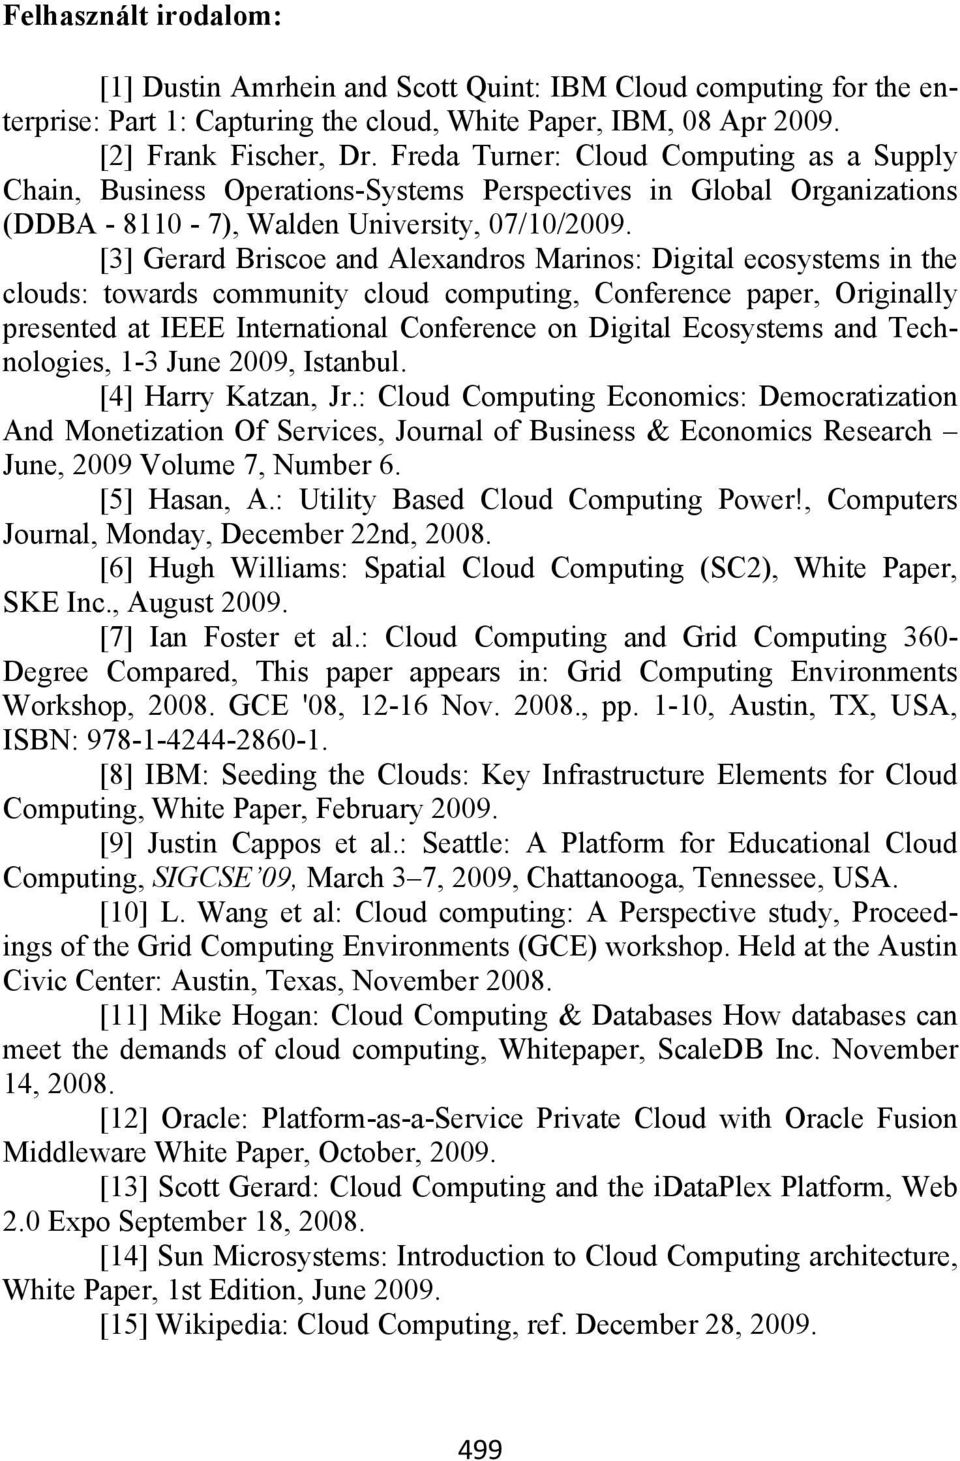 [3] Gerard Briscoe and Alexandros Marinos: Digital ecosystems in the clouds: towards community cloud computing, Conference paper, Originally presented at IEEE International Conference on Digital